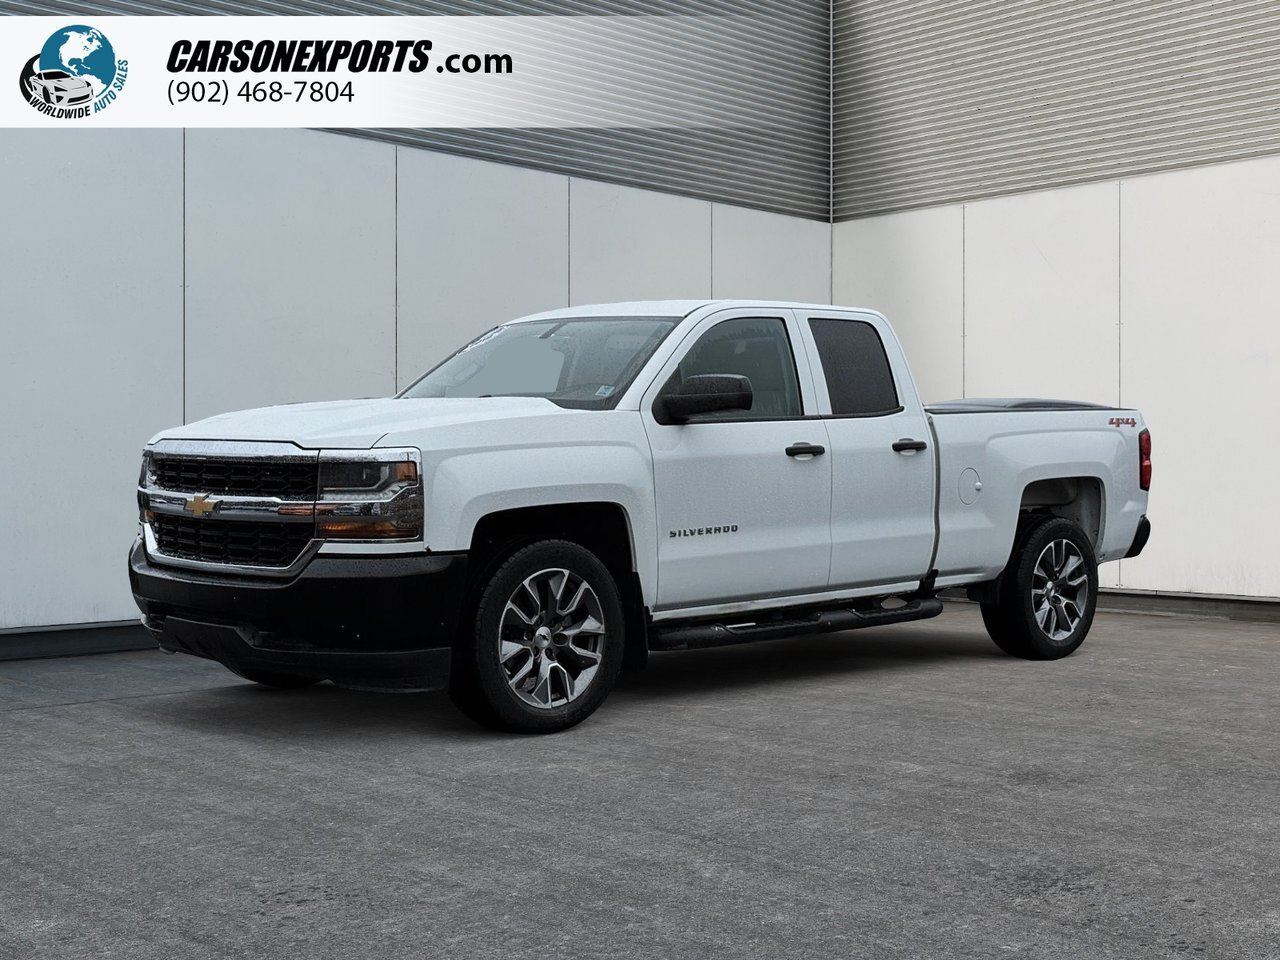 2019 Chevrolet Silverado 1500 WT The best place to buy a used car. Period.